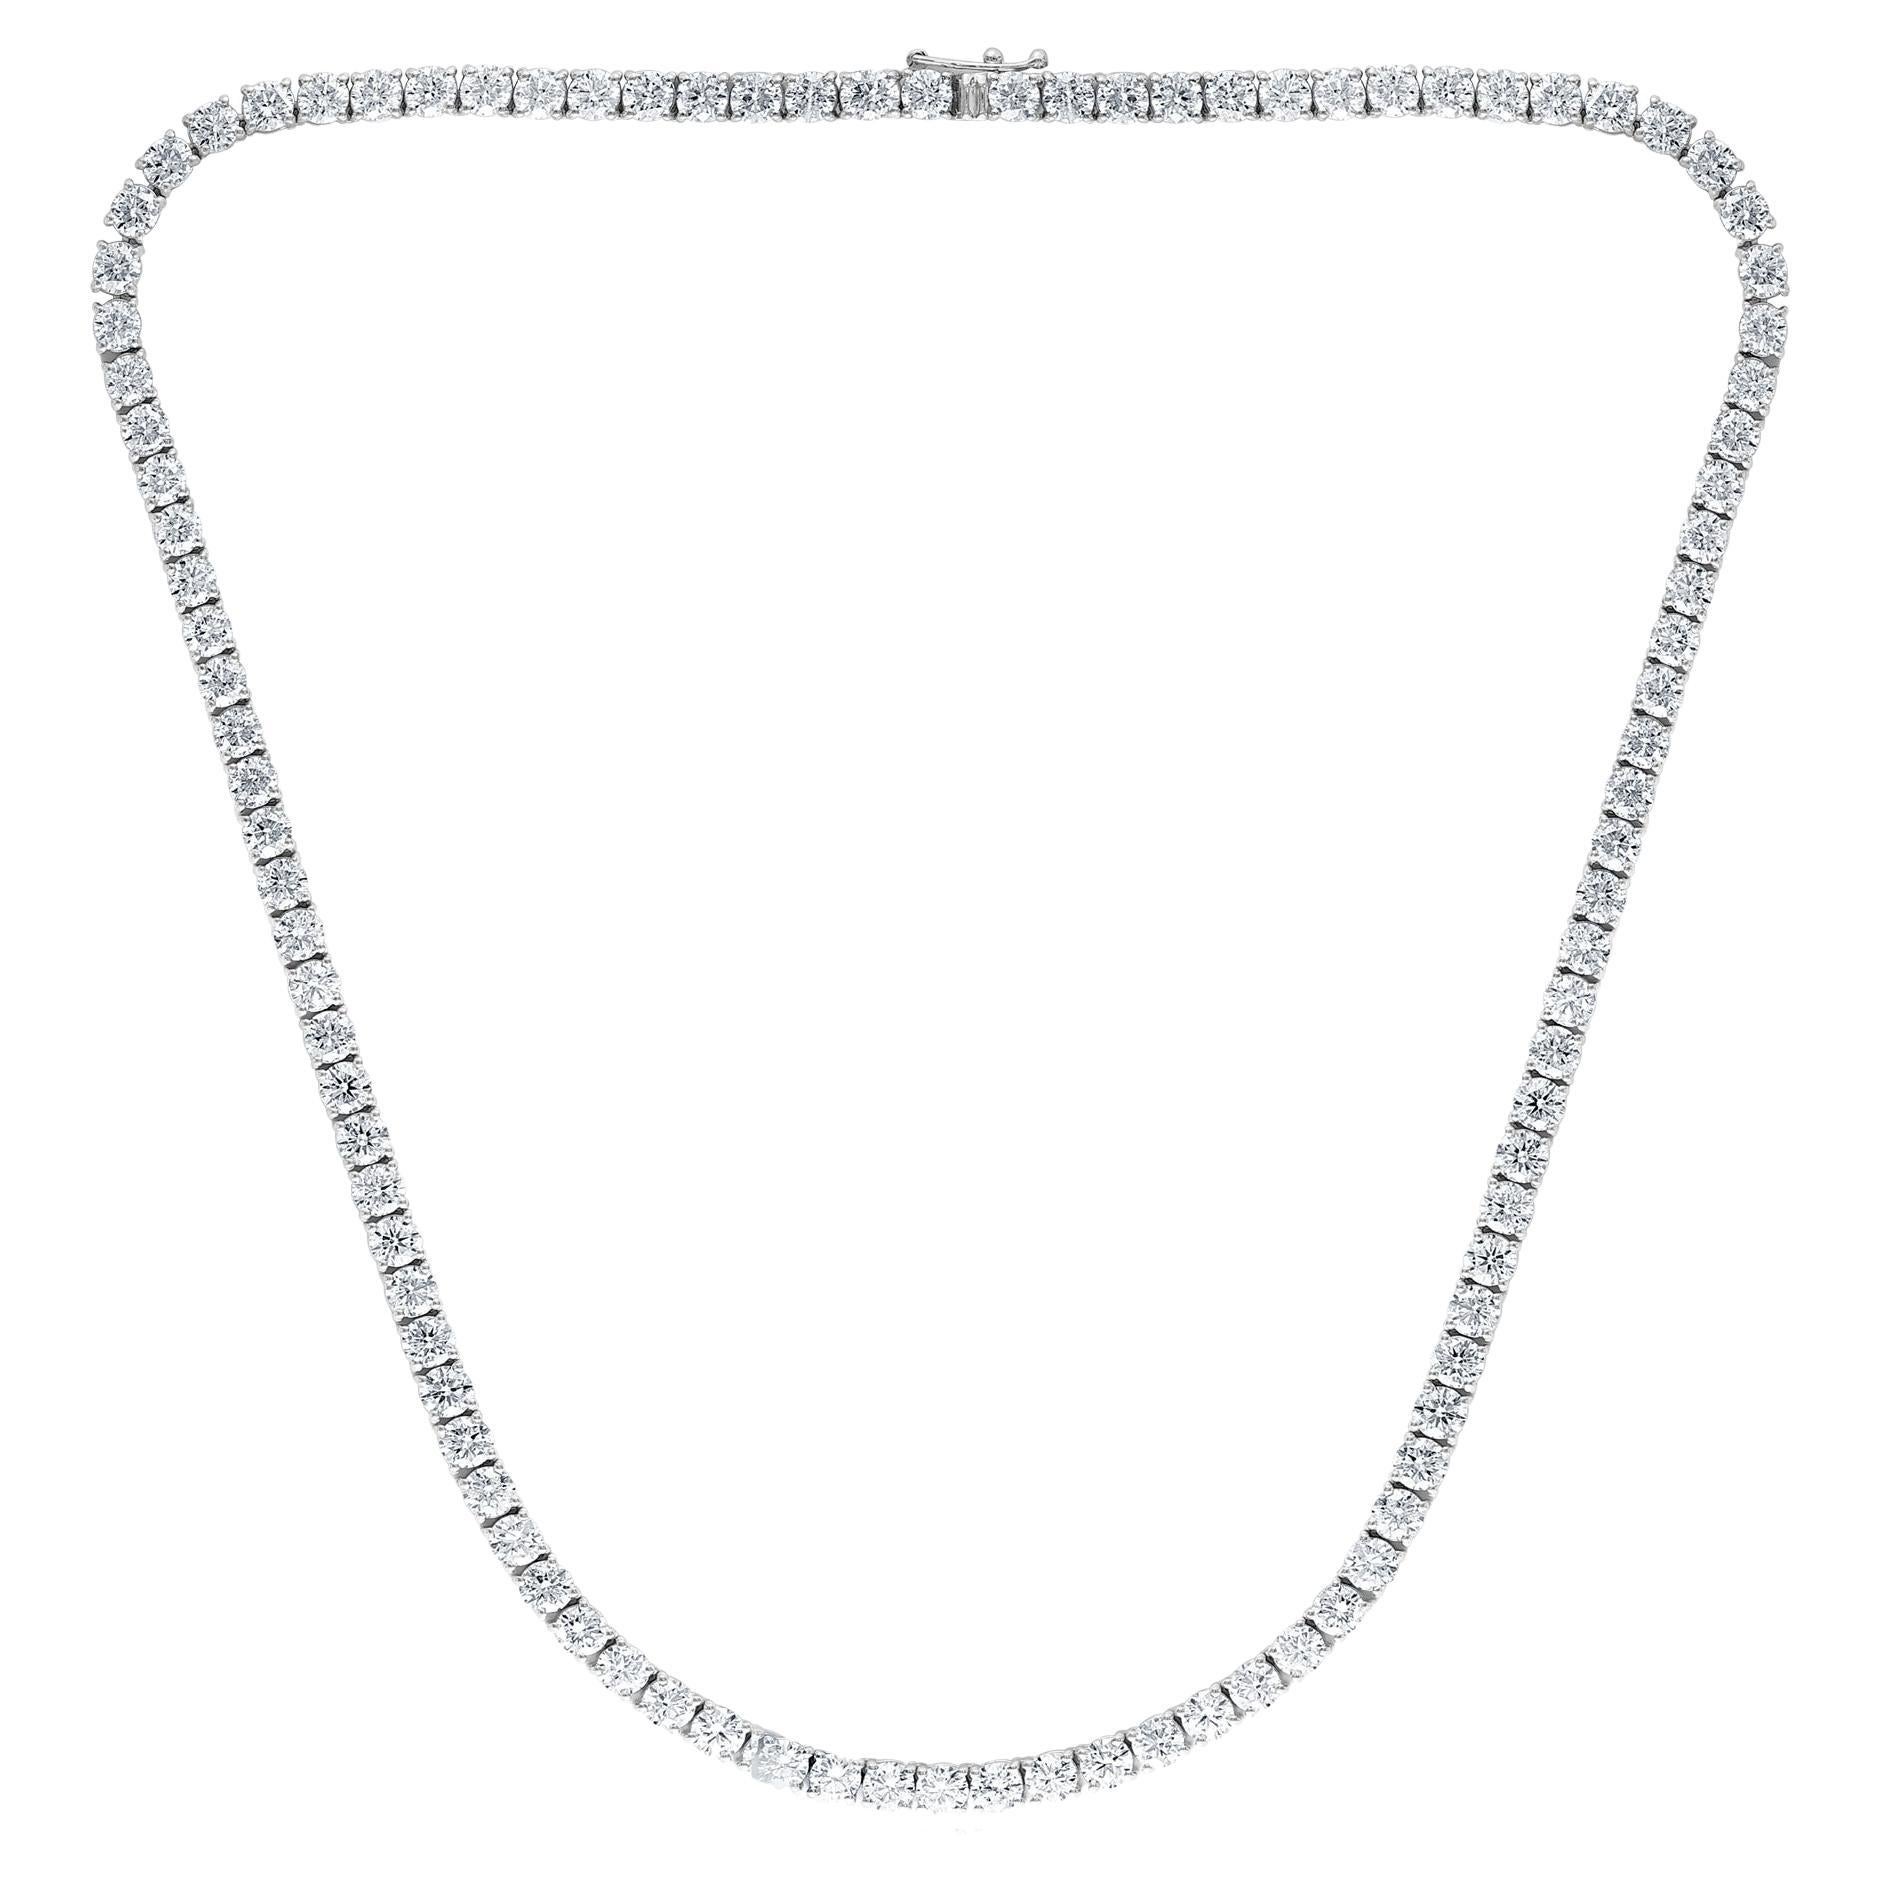 25.03 Carat Diamond Tennis Necklace in 14K White Gold For Sale